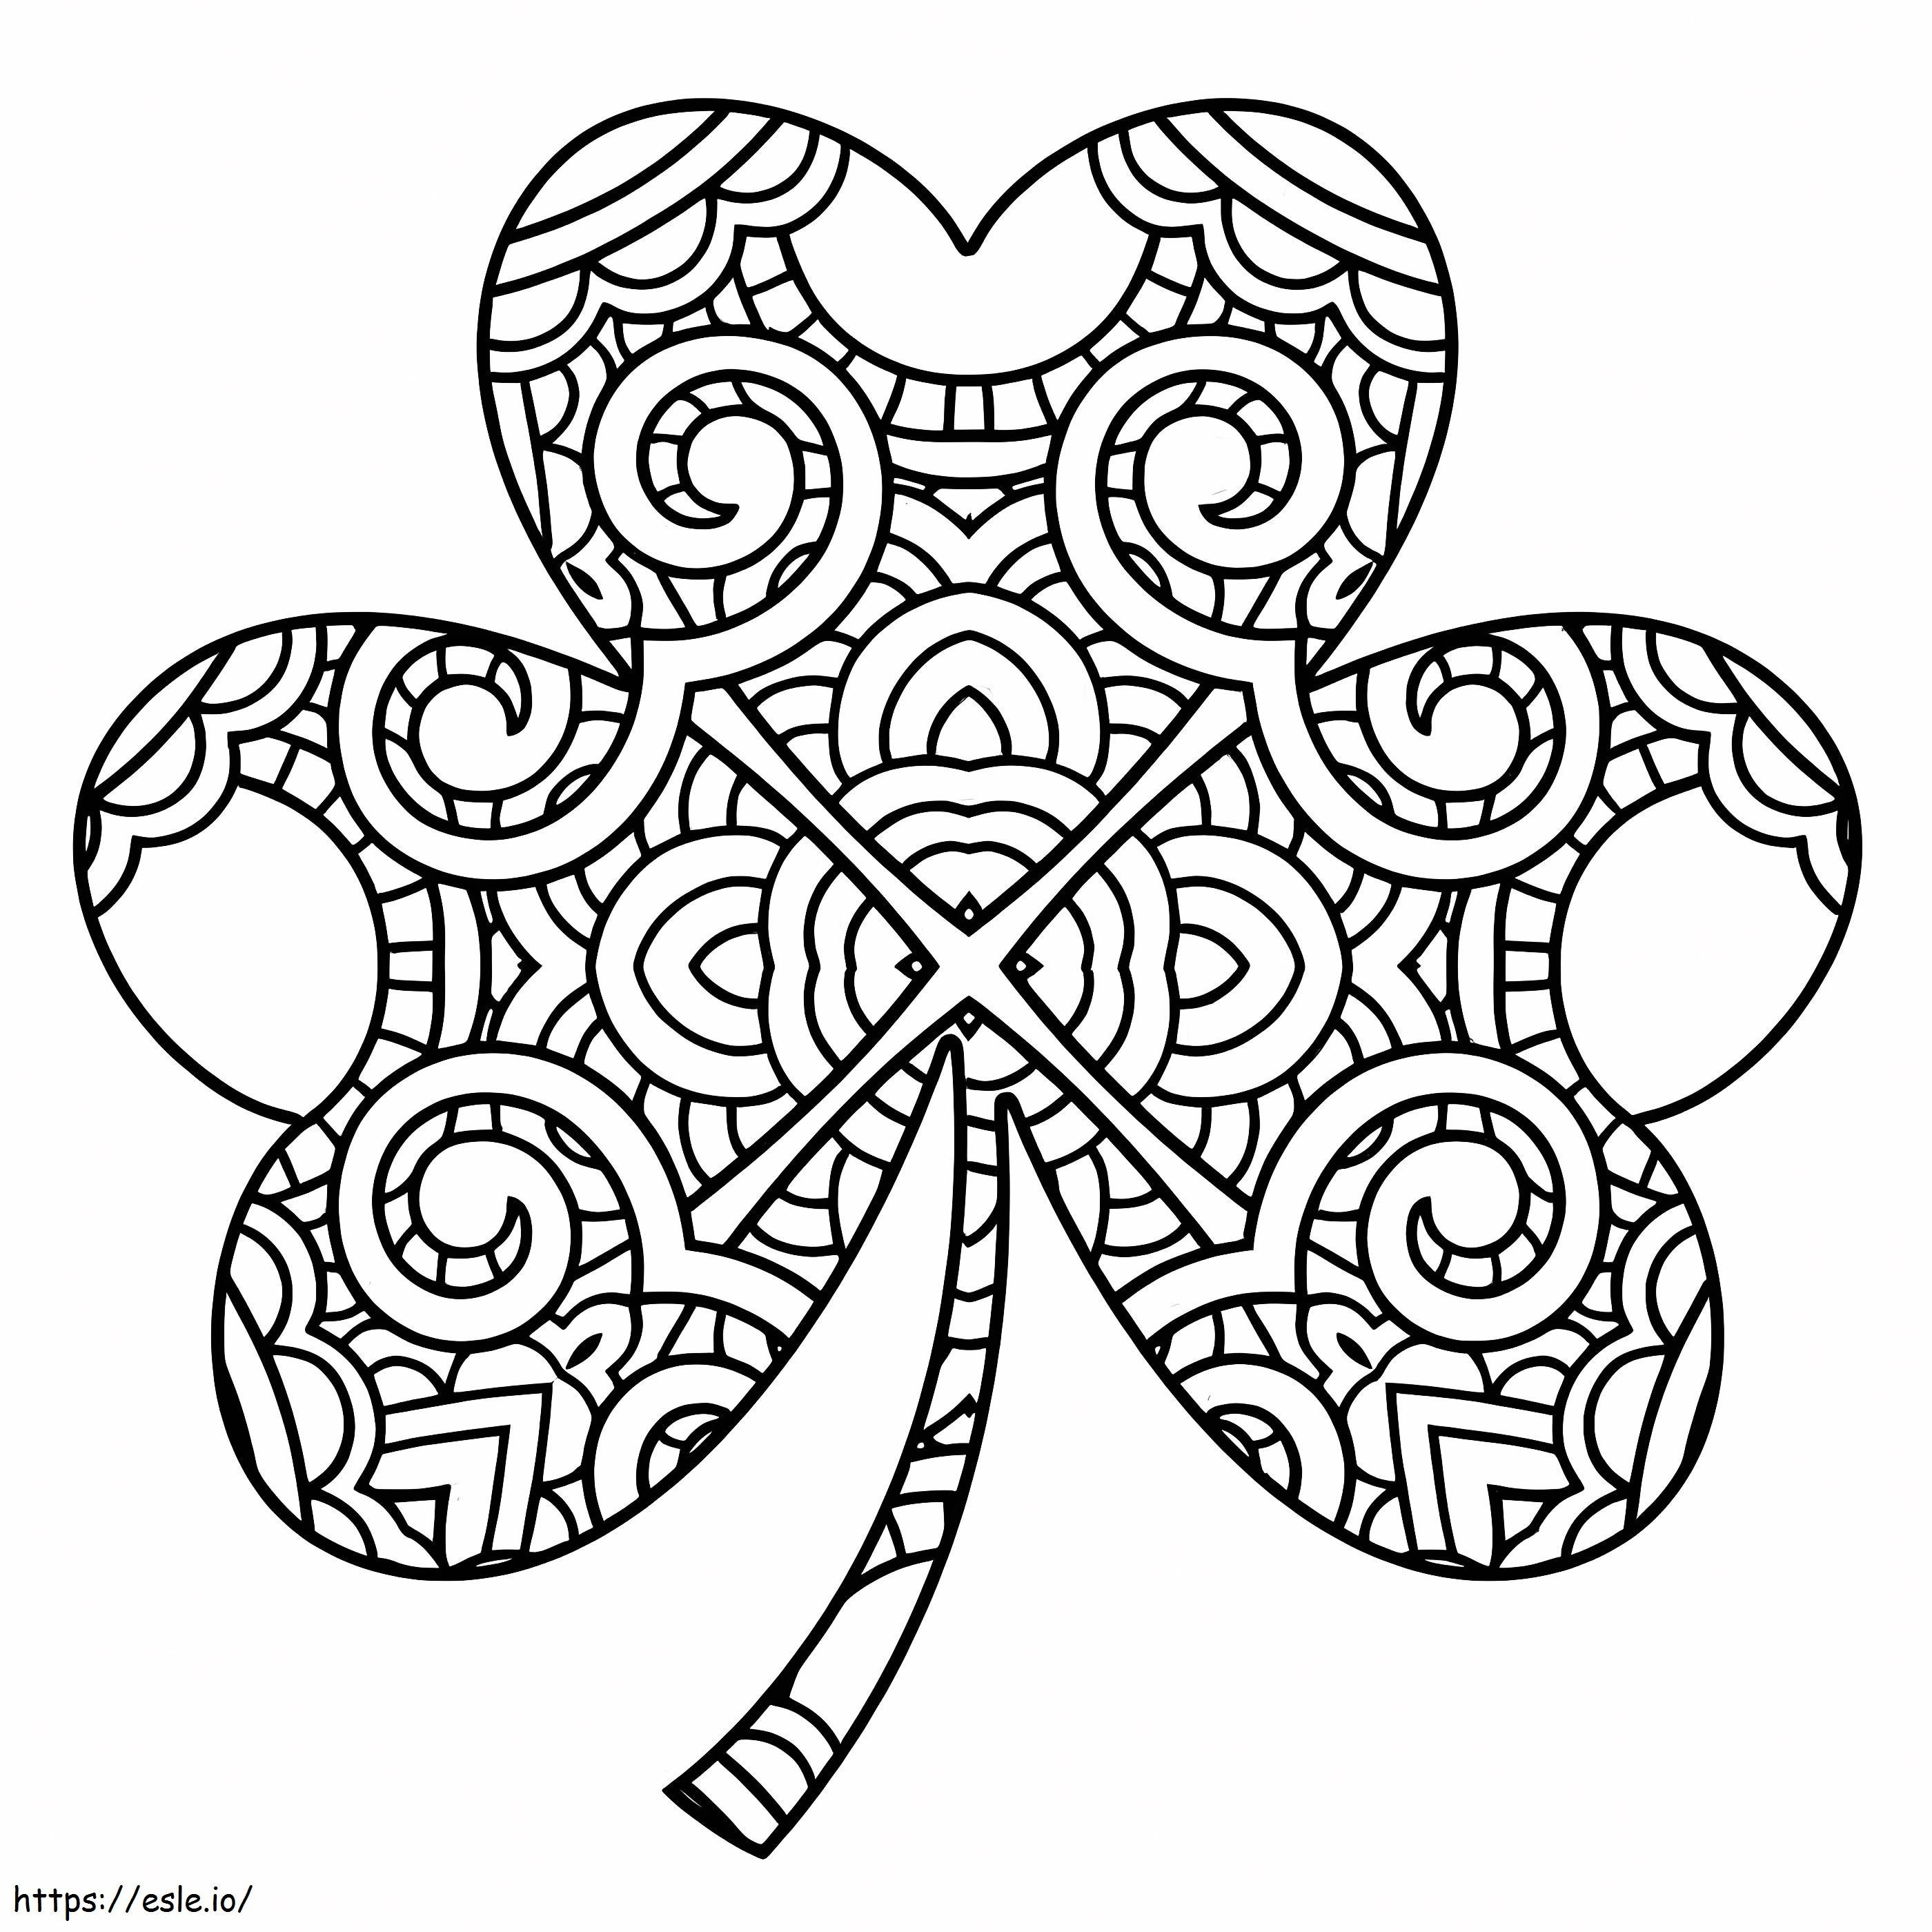 Clover Adult 1 coloring page